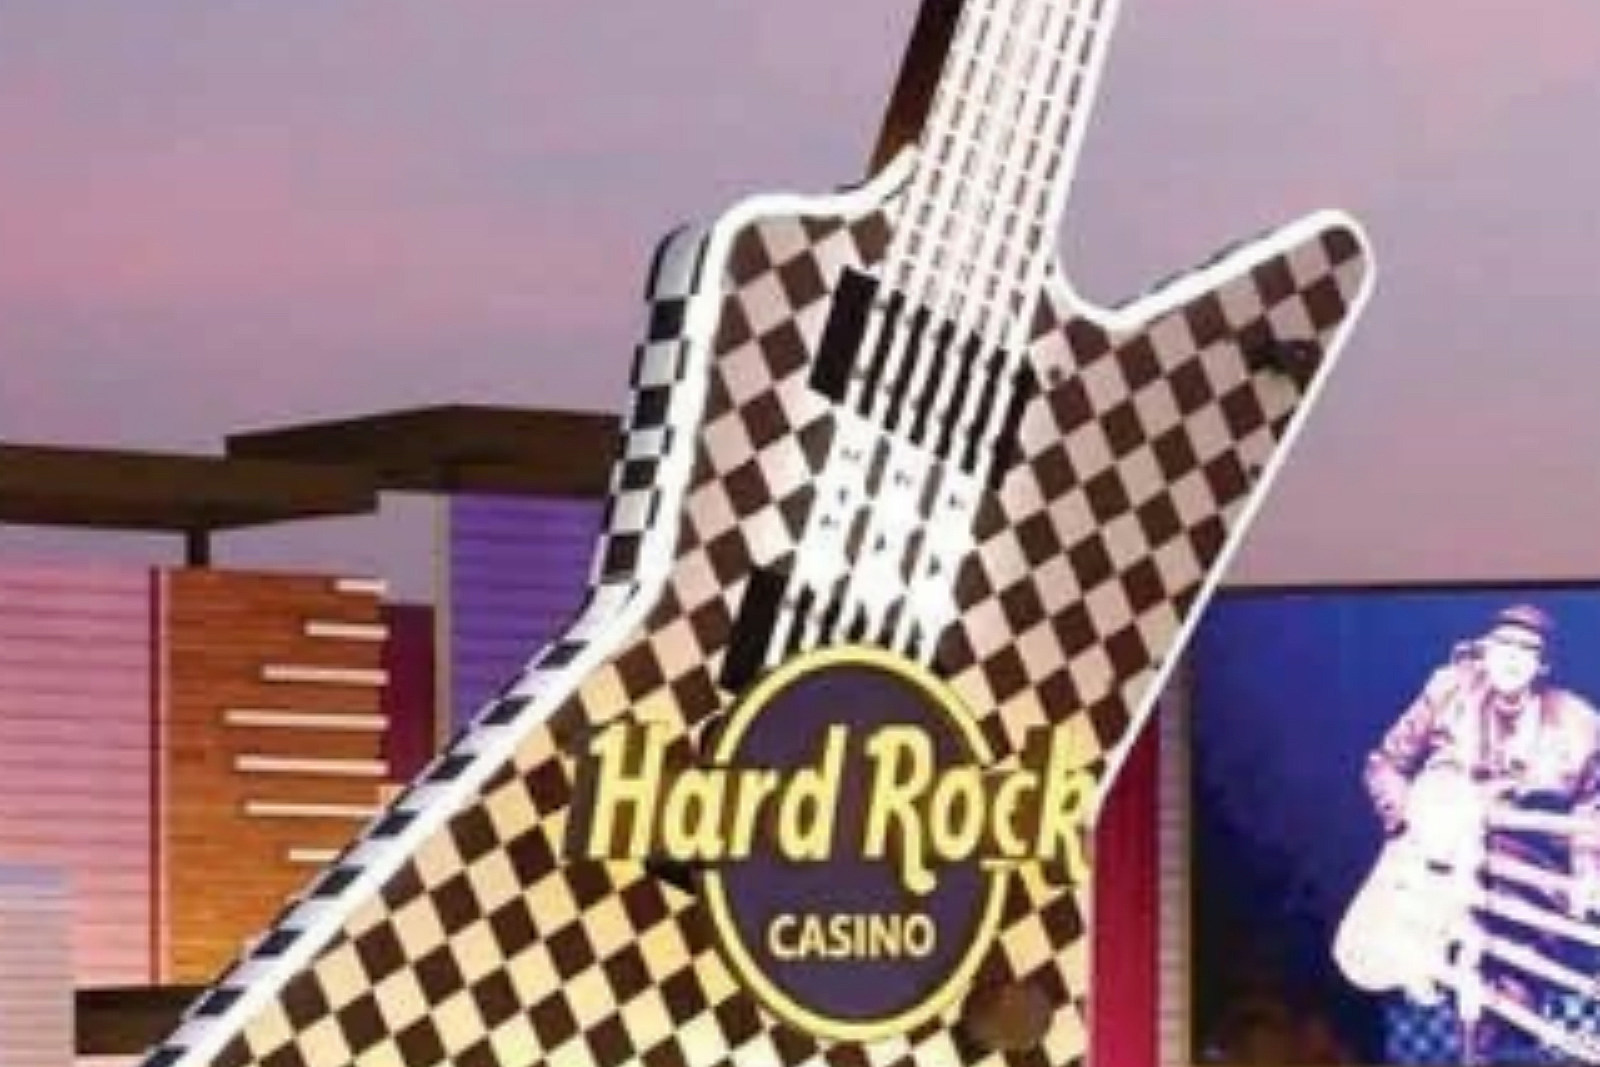 what casino does hard rock nick own